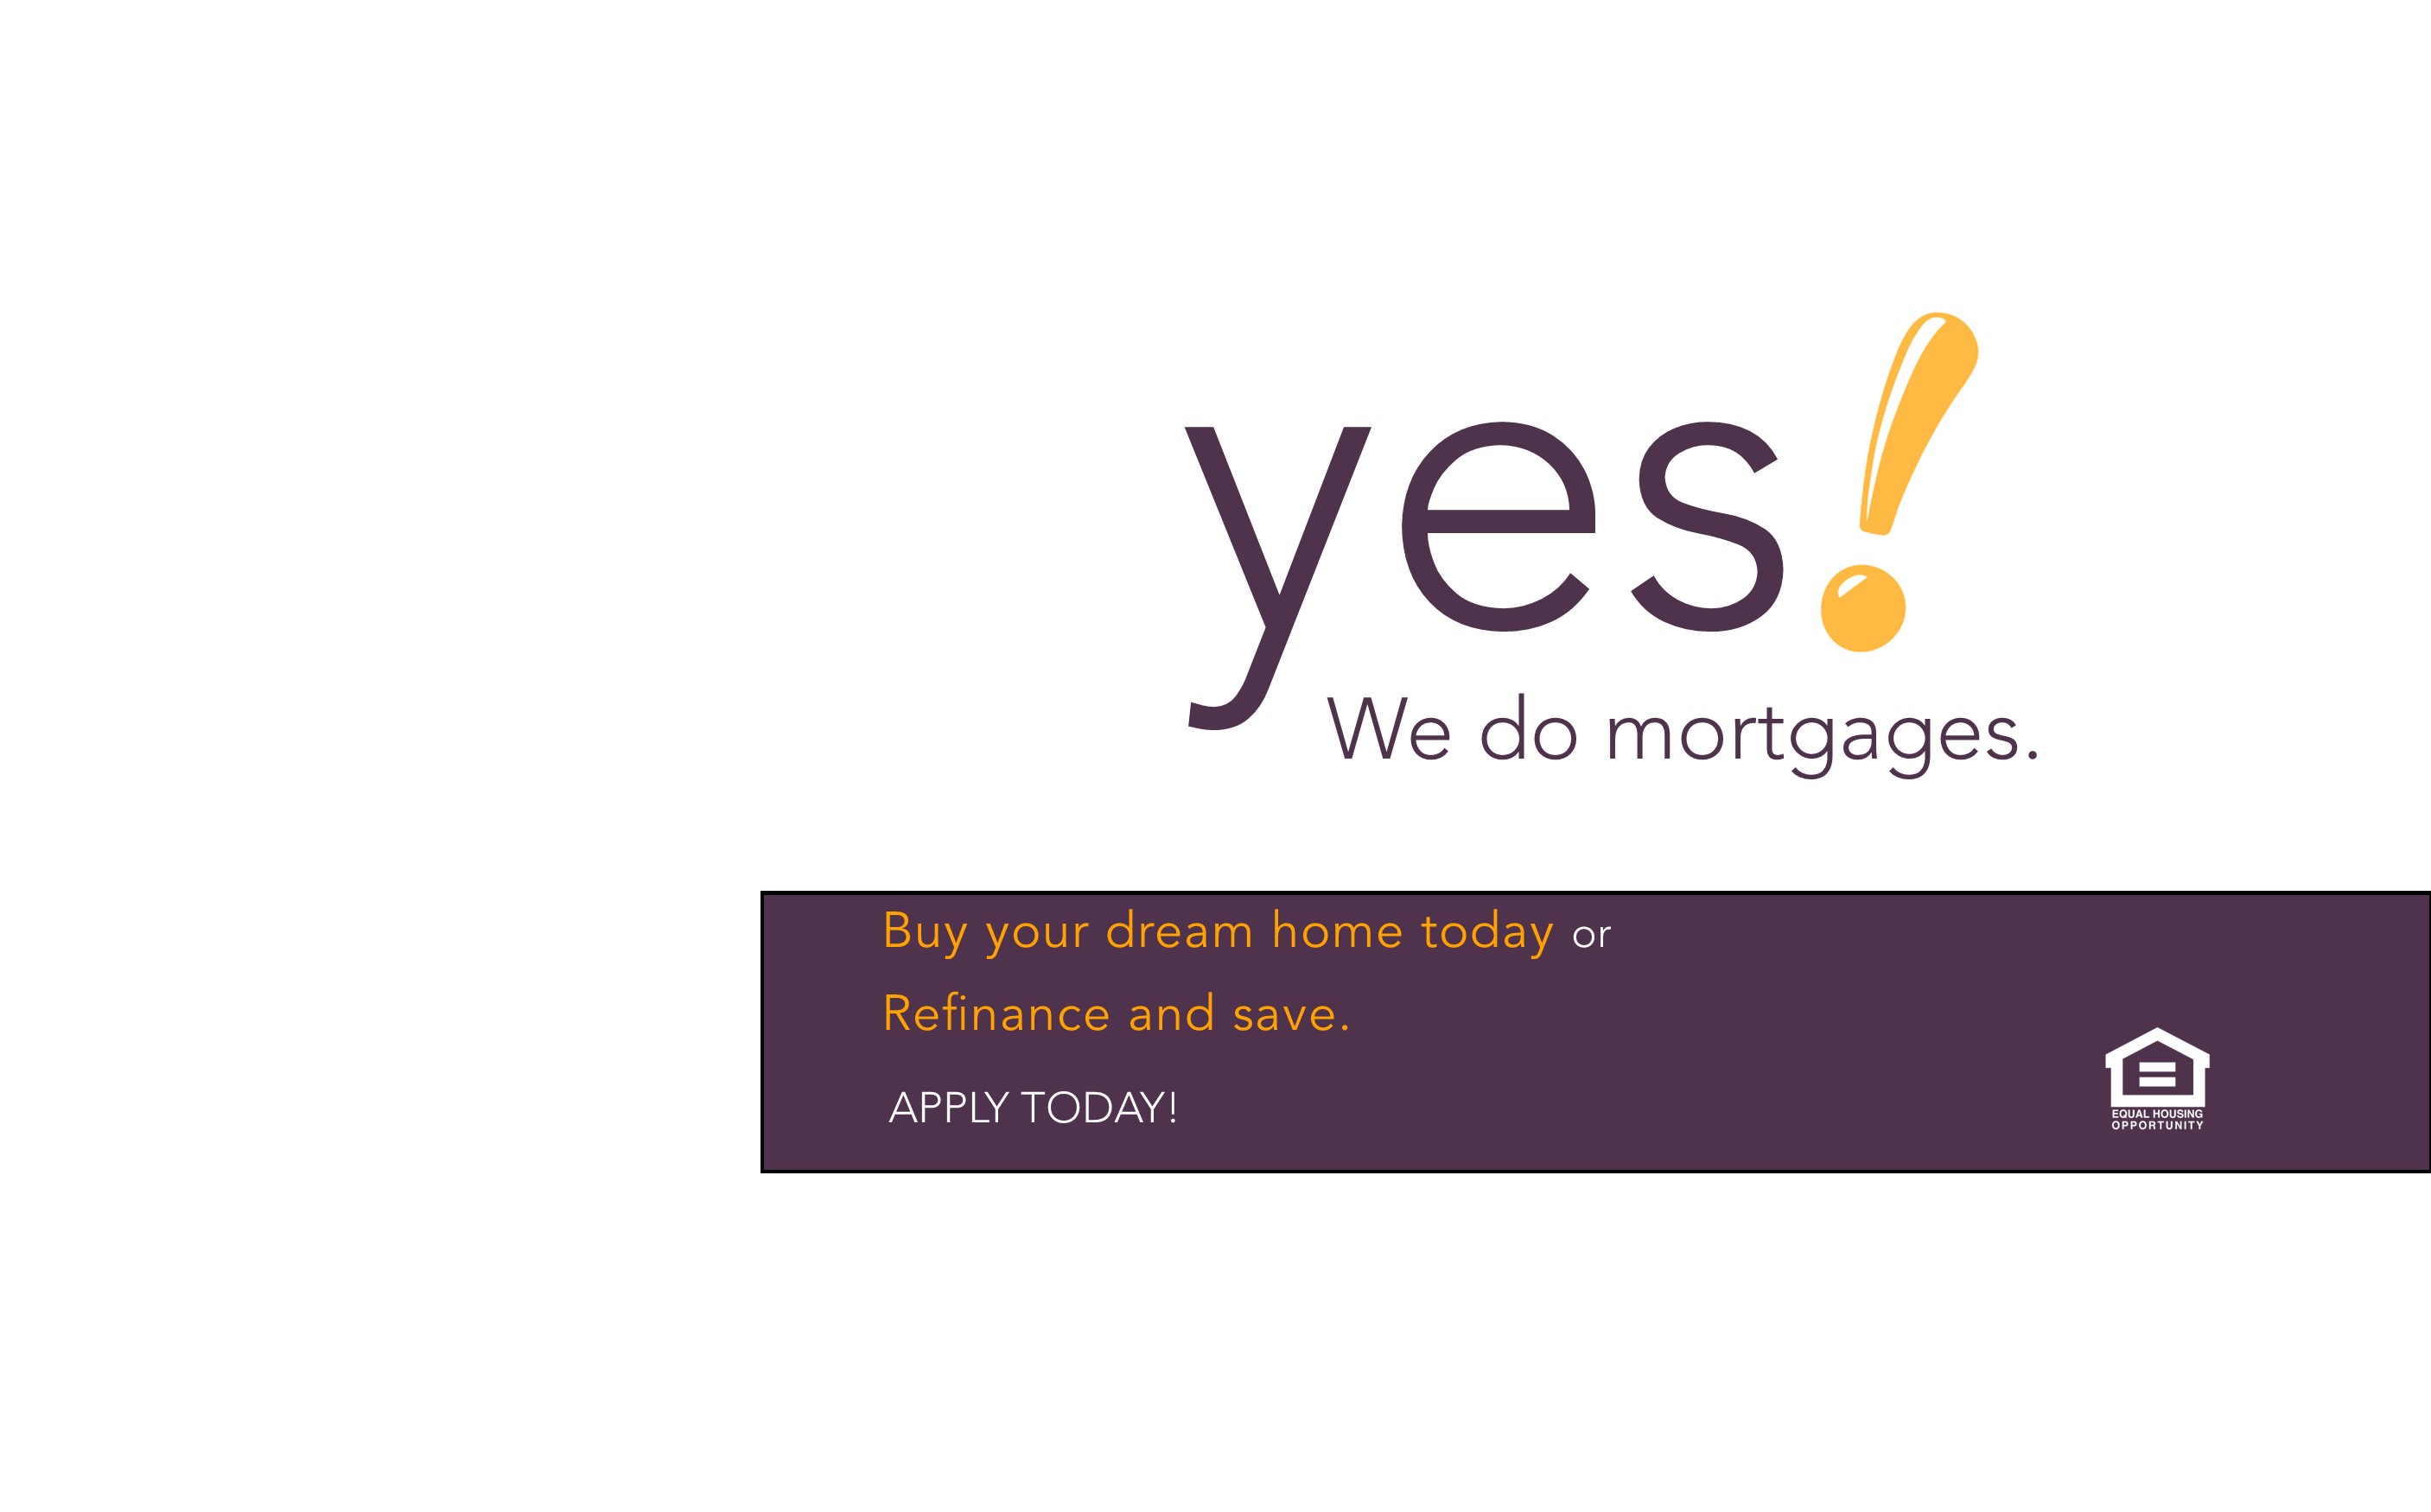 Yes we do mortgages. Buy your dream home or refinance and save.  Apply today.